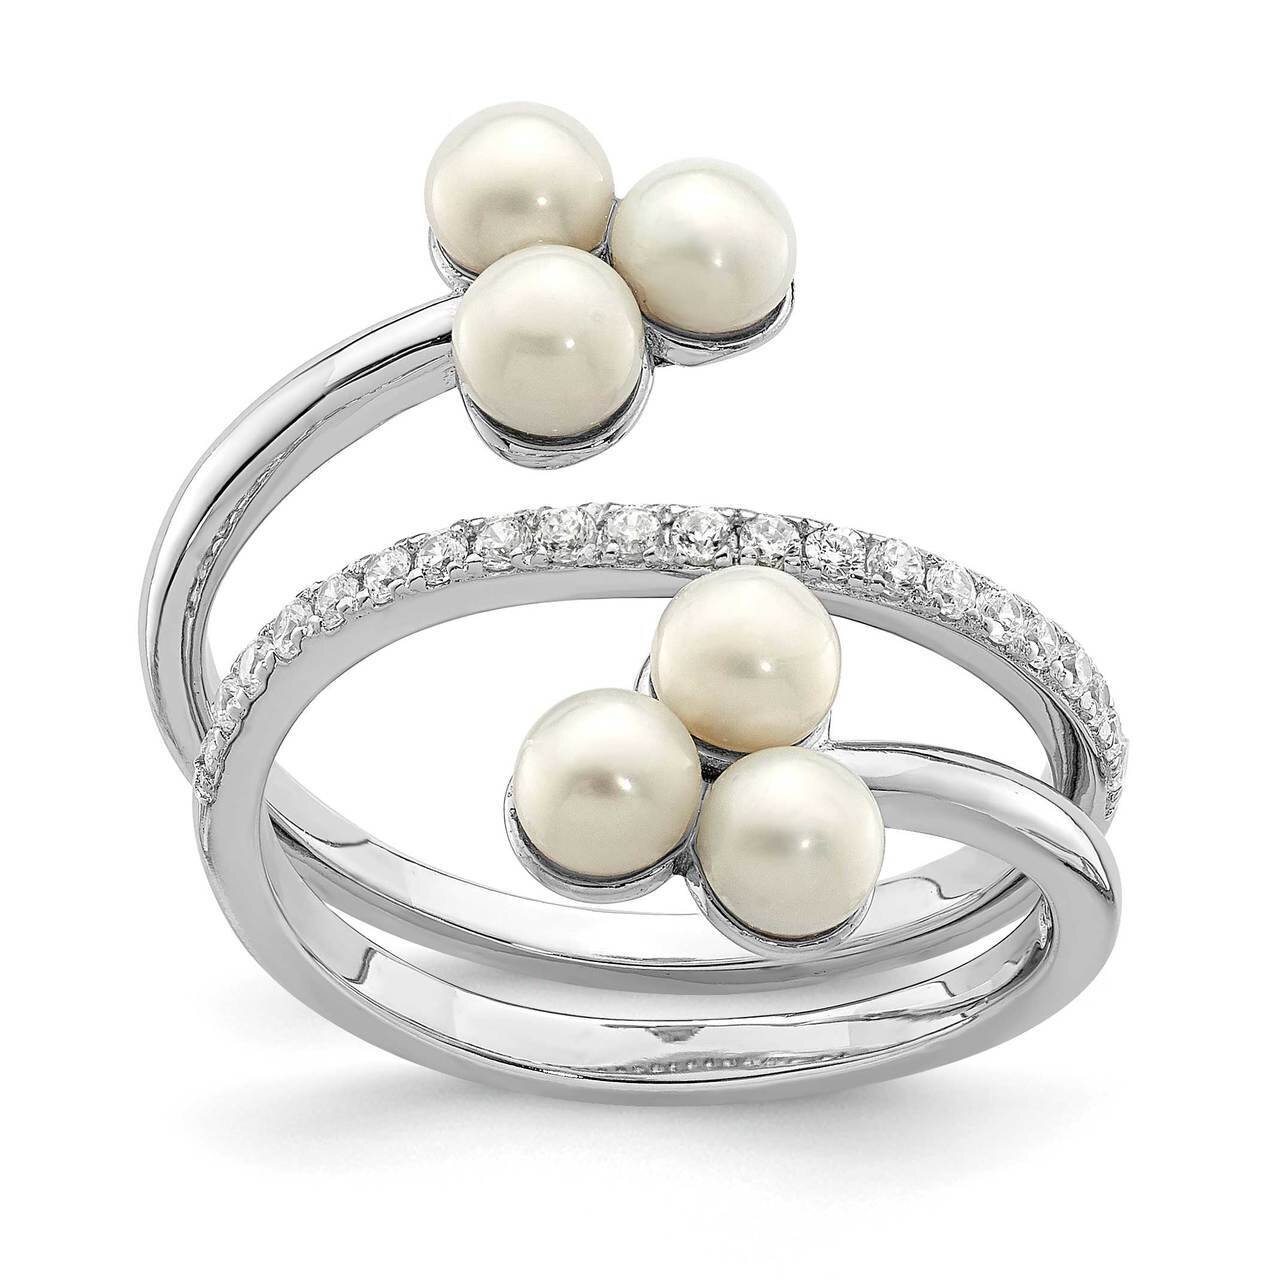 3-4mm White Button Freshwater Cultured Pearl CZ Diamond Adj. Ring Sterling Silver Rhodium Plated QR7157